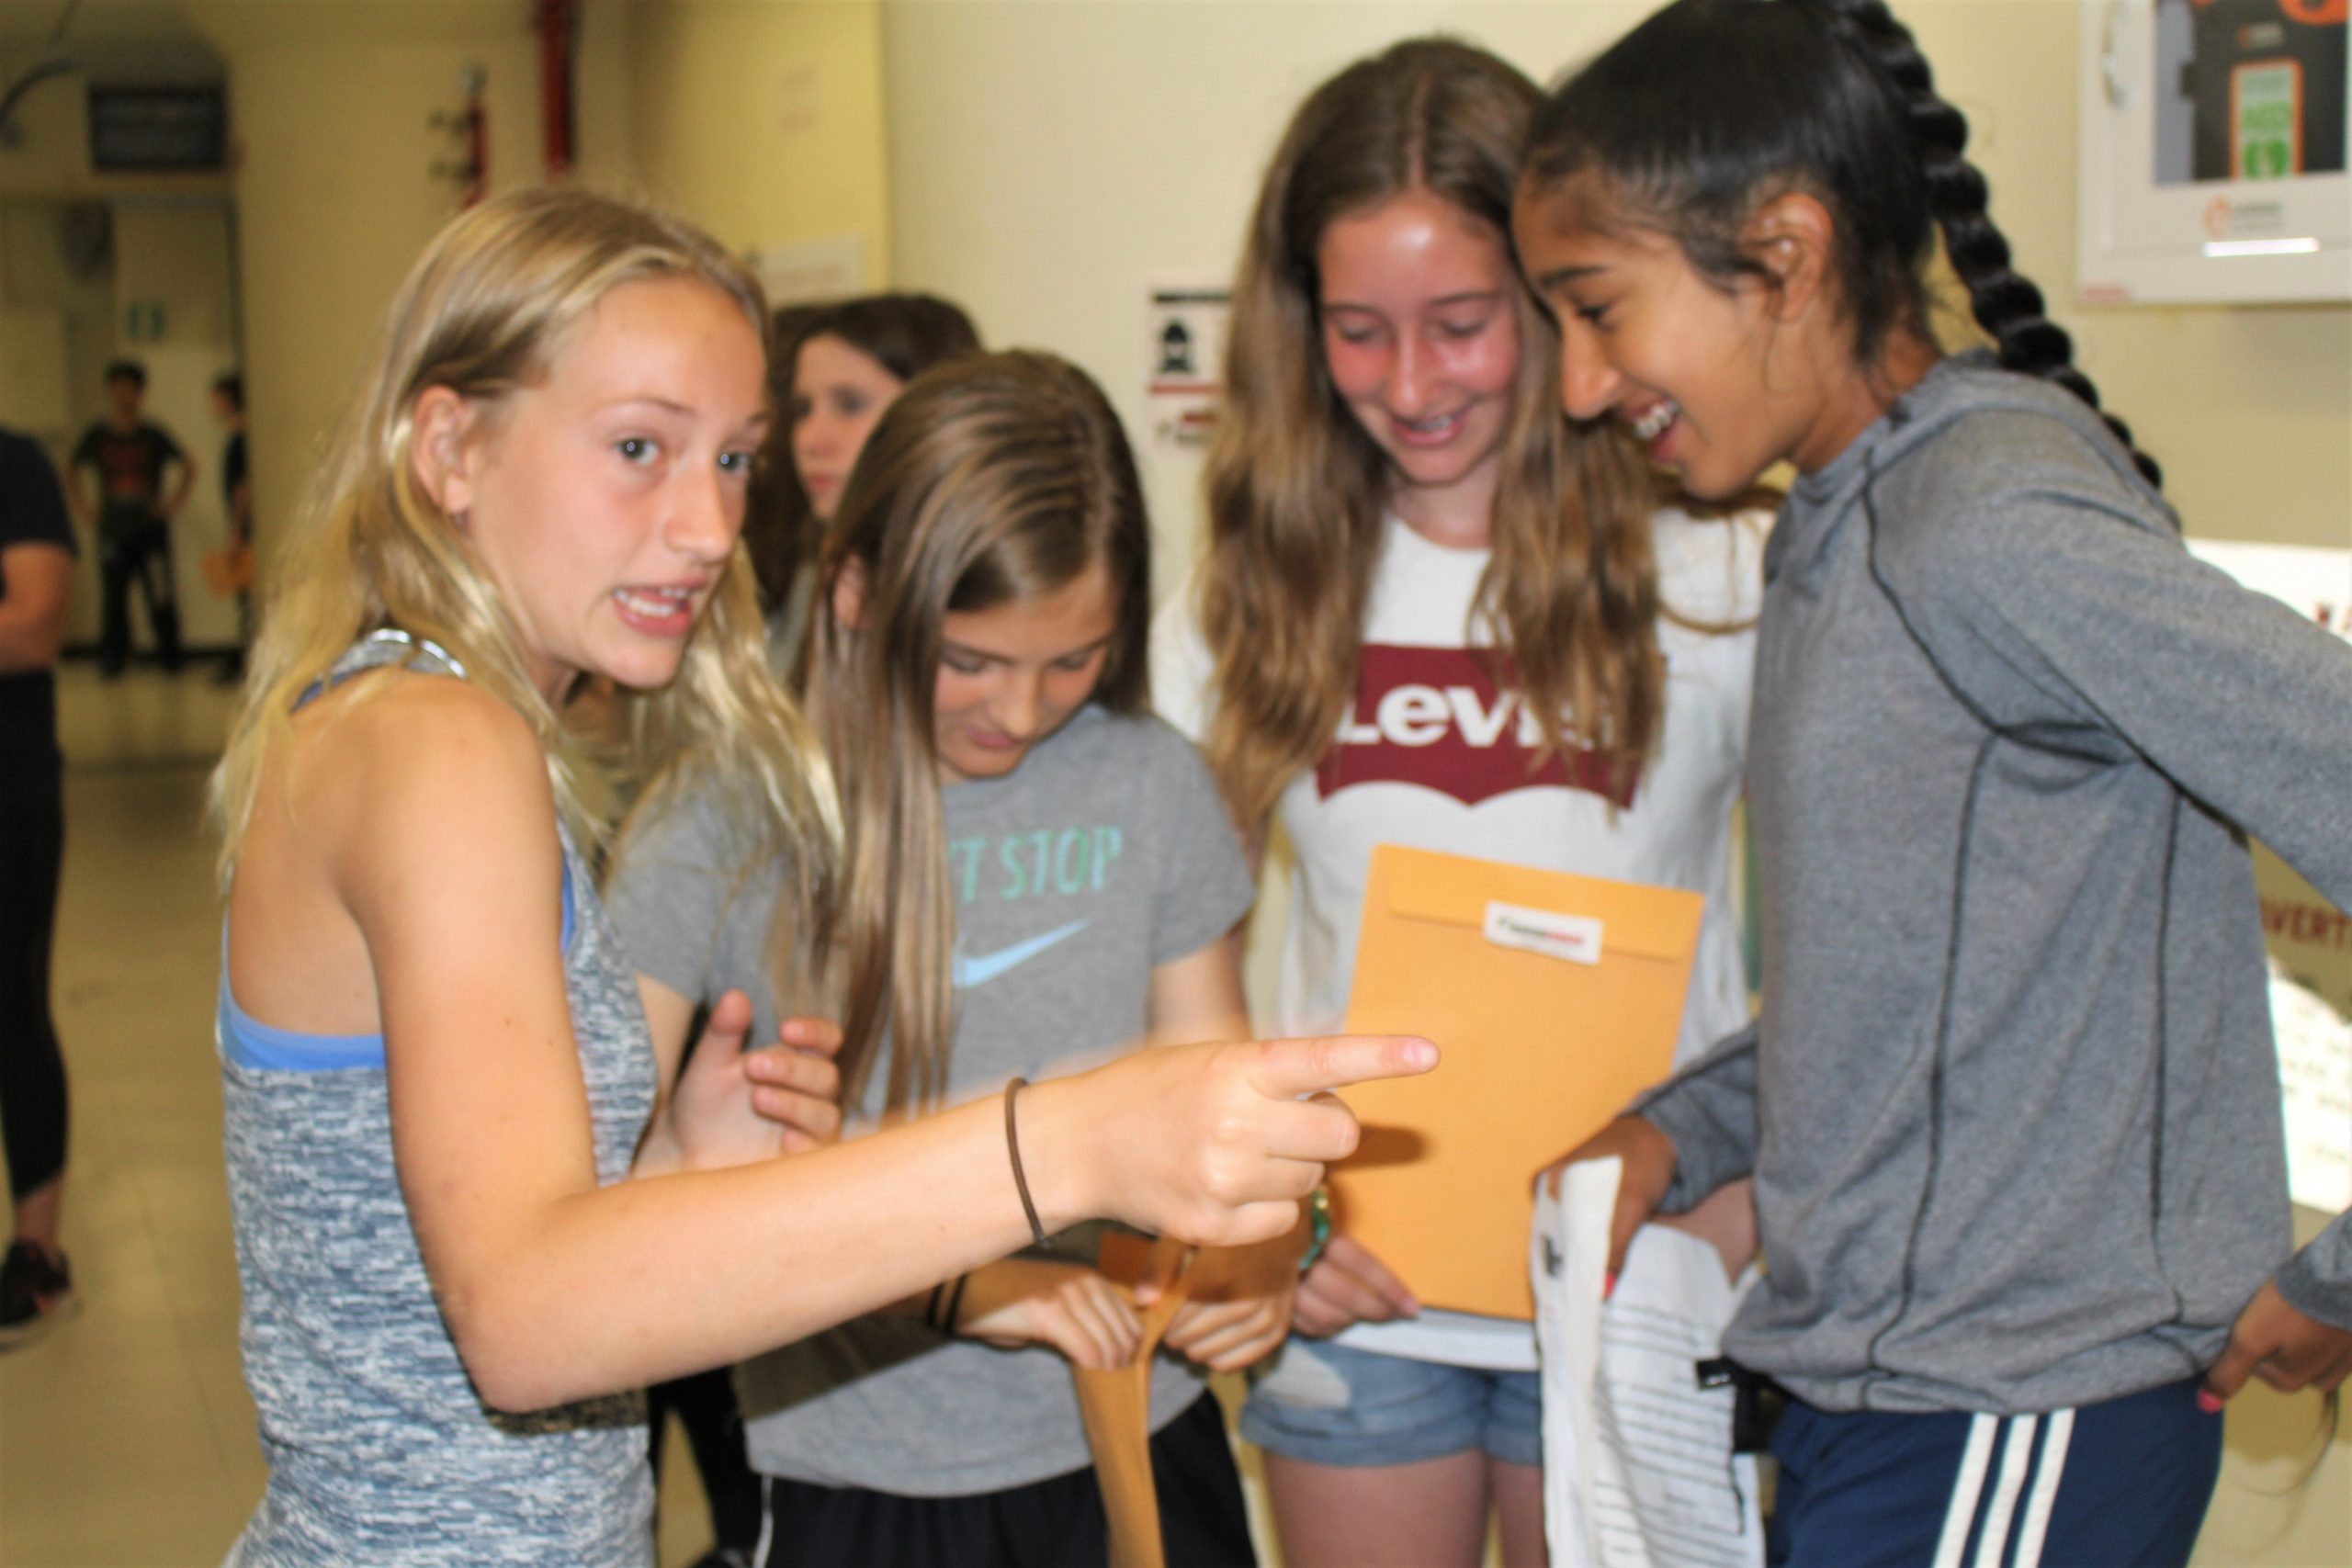 Four students look excitedly at clues in their hands, and one of them is pointing.